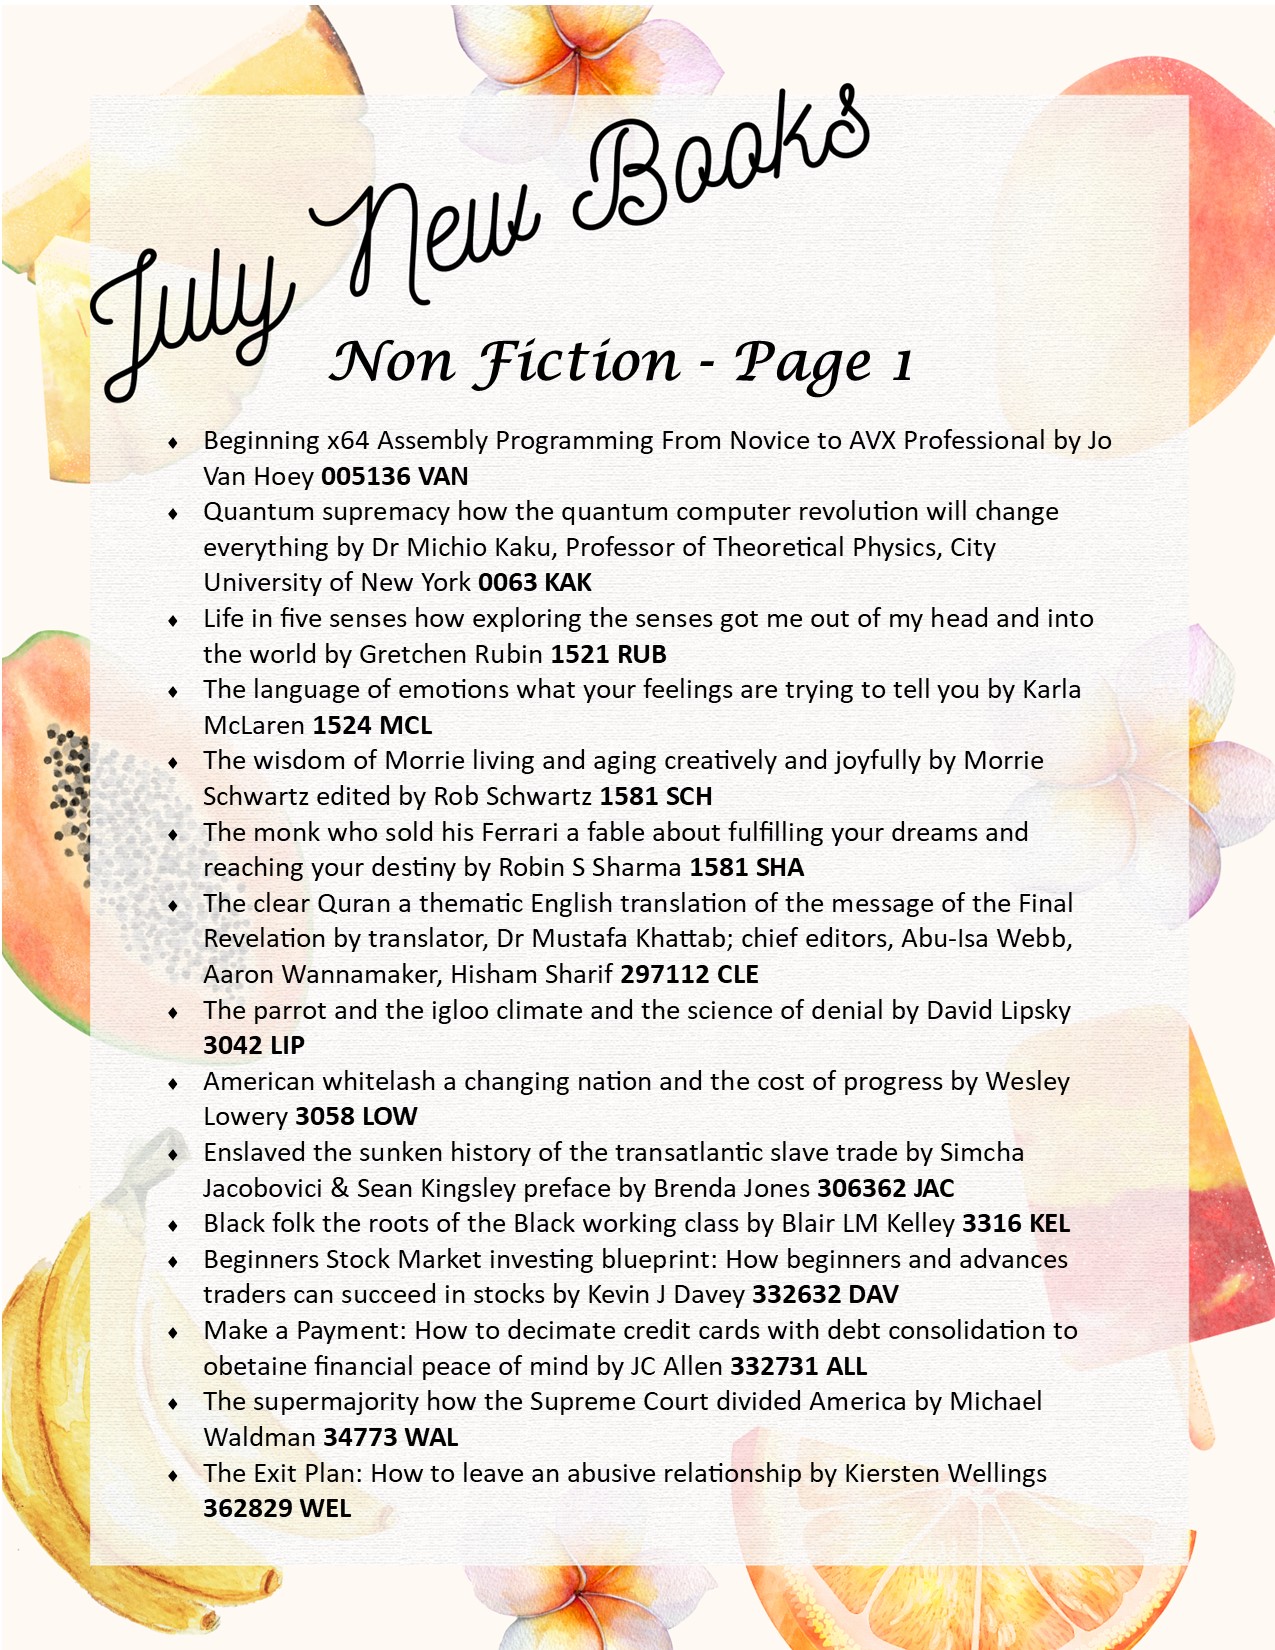 July New Non Fiction PG 1